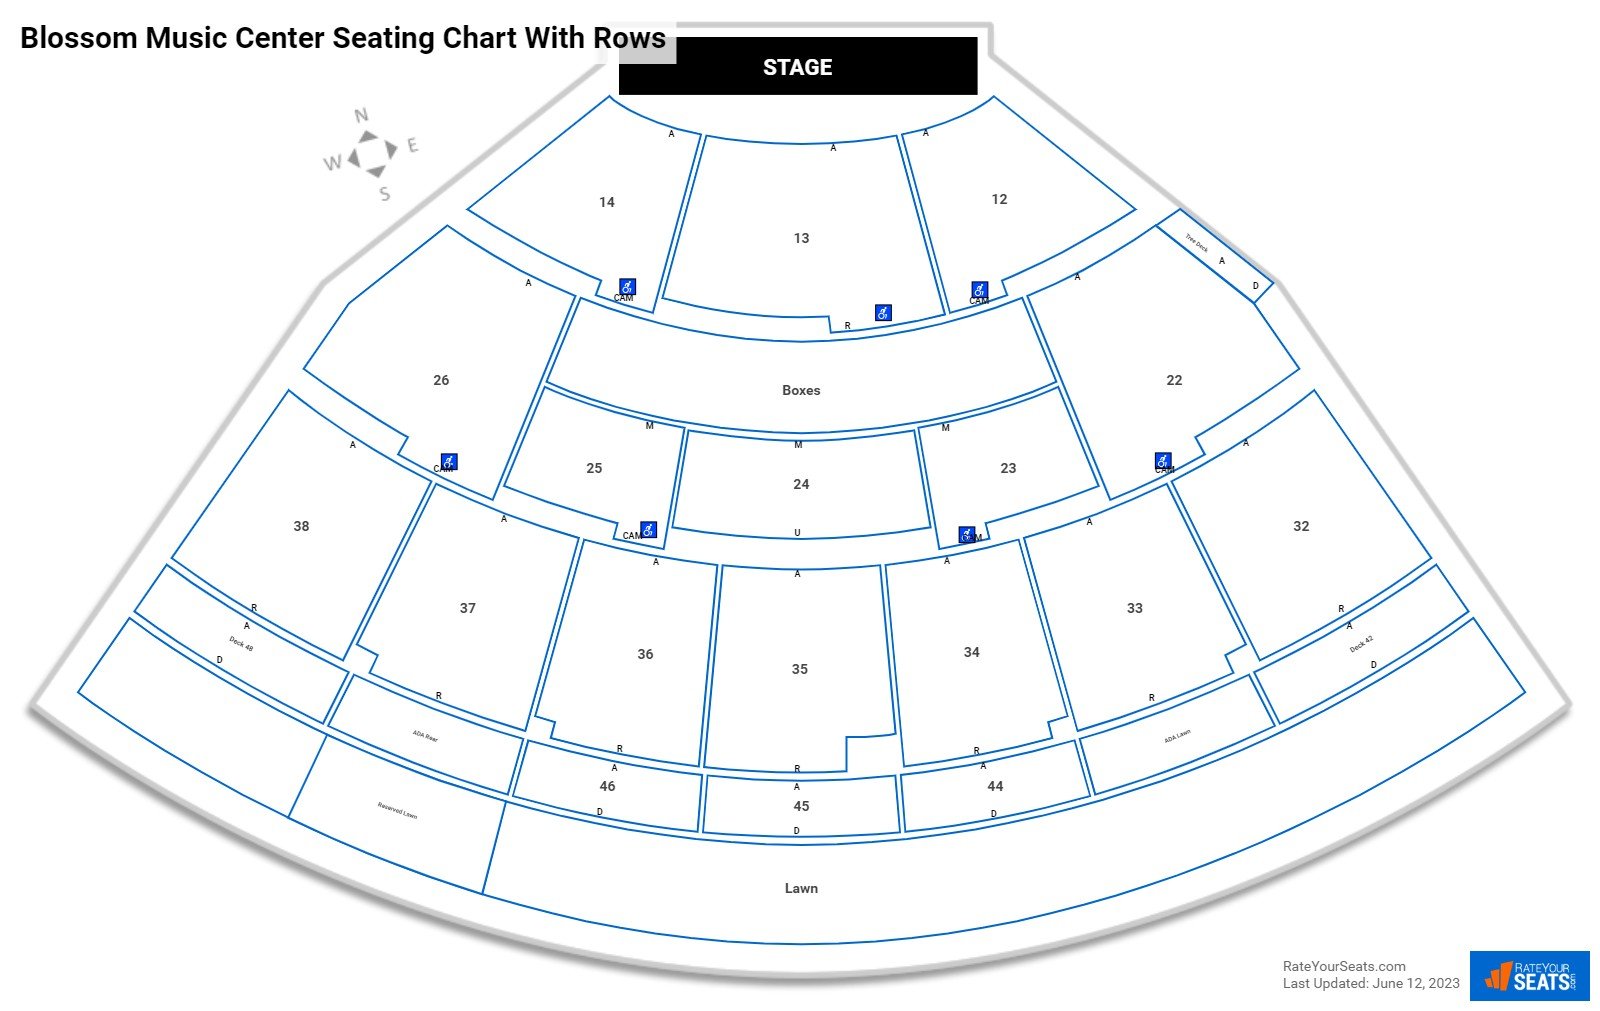 Blossom Music Center seating chart with row numbers